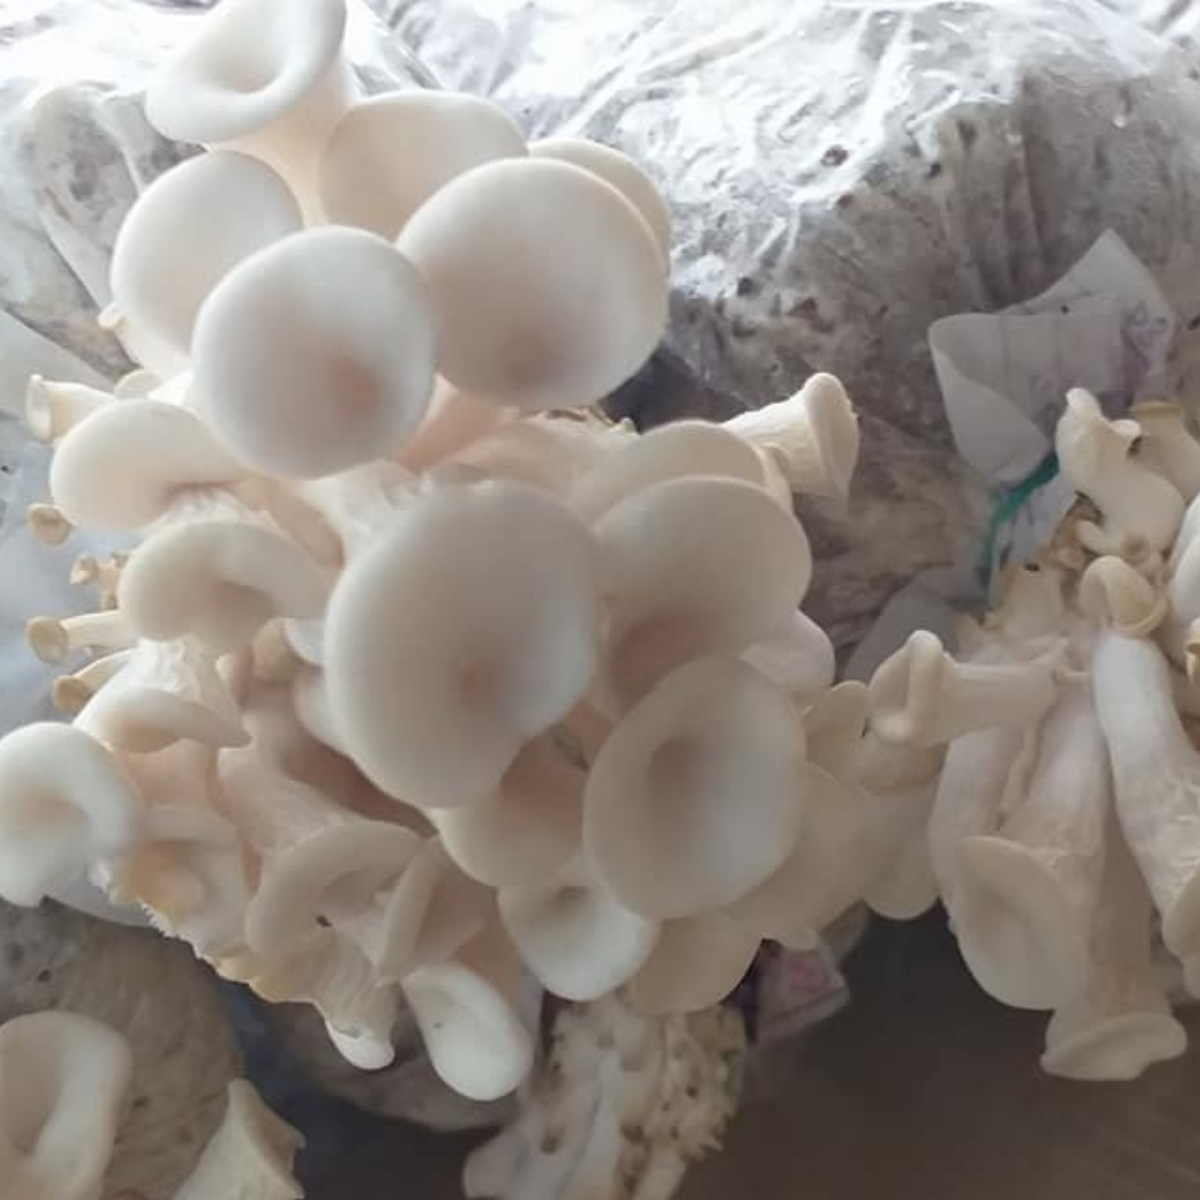 Whether foraged for in the wild or cultivated at home, oyster mushrooms are some of the most sought-after and beloved of all fungi.